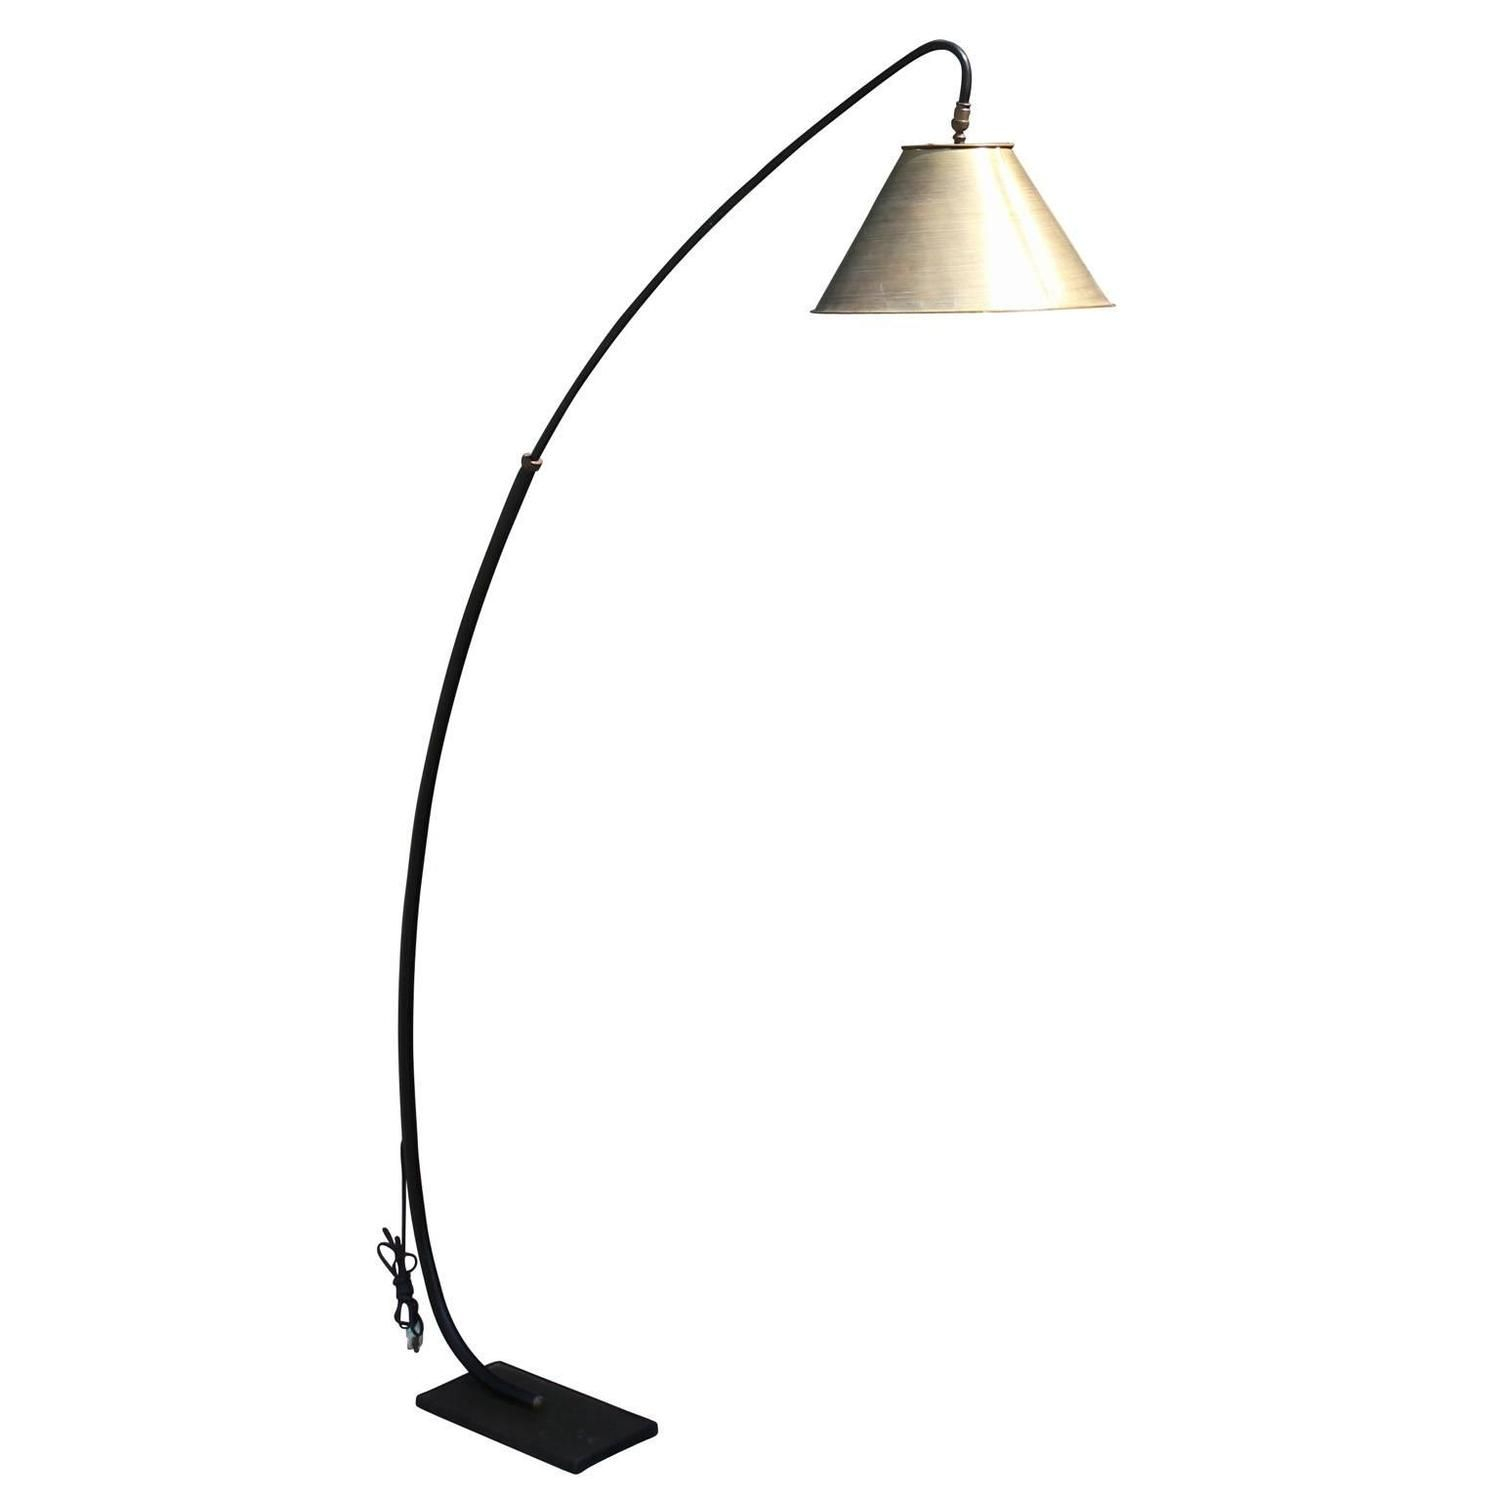 Curved Italian Style Floor Lamp James Mahon Apartment throughout proportions 1500 X 1500